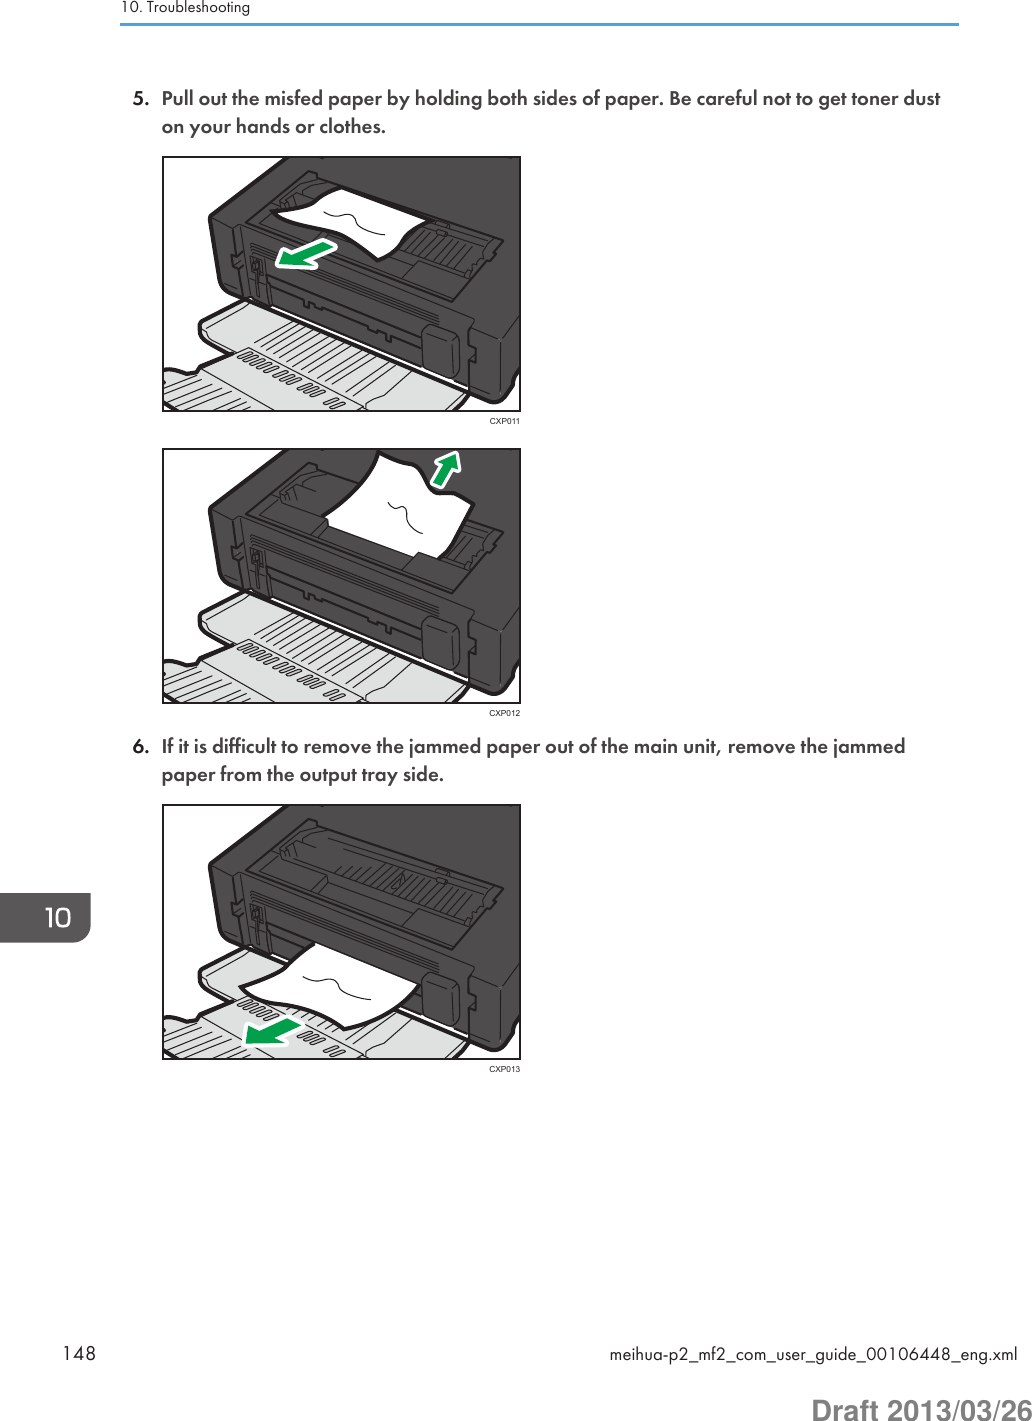 5. Pull out the misfed paper by holding both sides of paper. Be careful not to get toner duston your hands or clothes.CXP011CXP0126. If it is difficult to remove the jammed paper out of the main unit, remove the jammedpaper from the output tray side.CXP01310. Troubleshooting148 meihua-p2_mf2_com_user_guide_00106448_eng.xmlDraft 2013/03/26